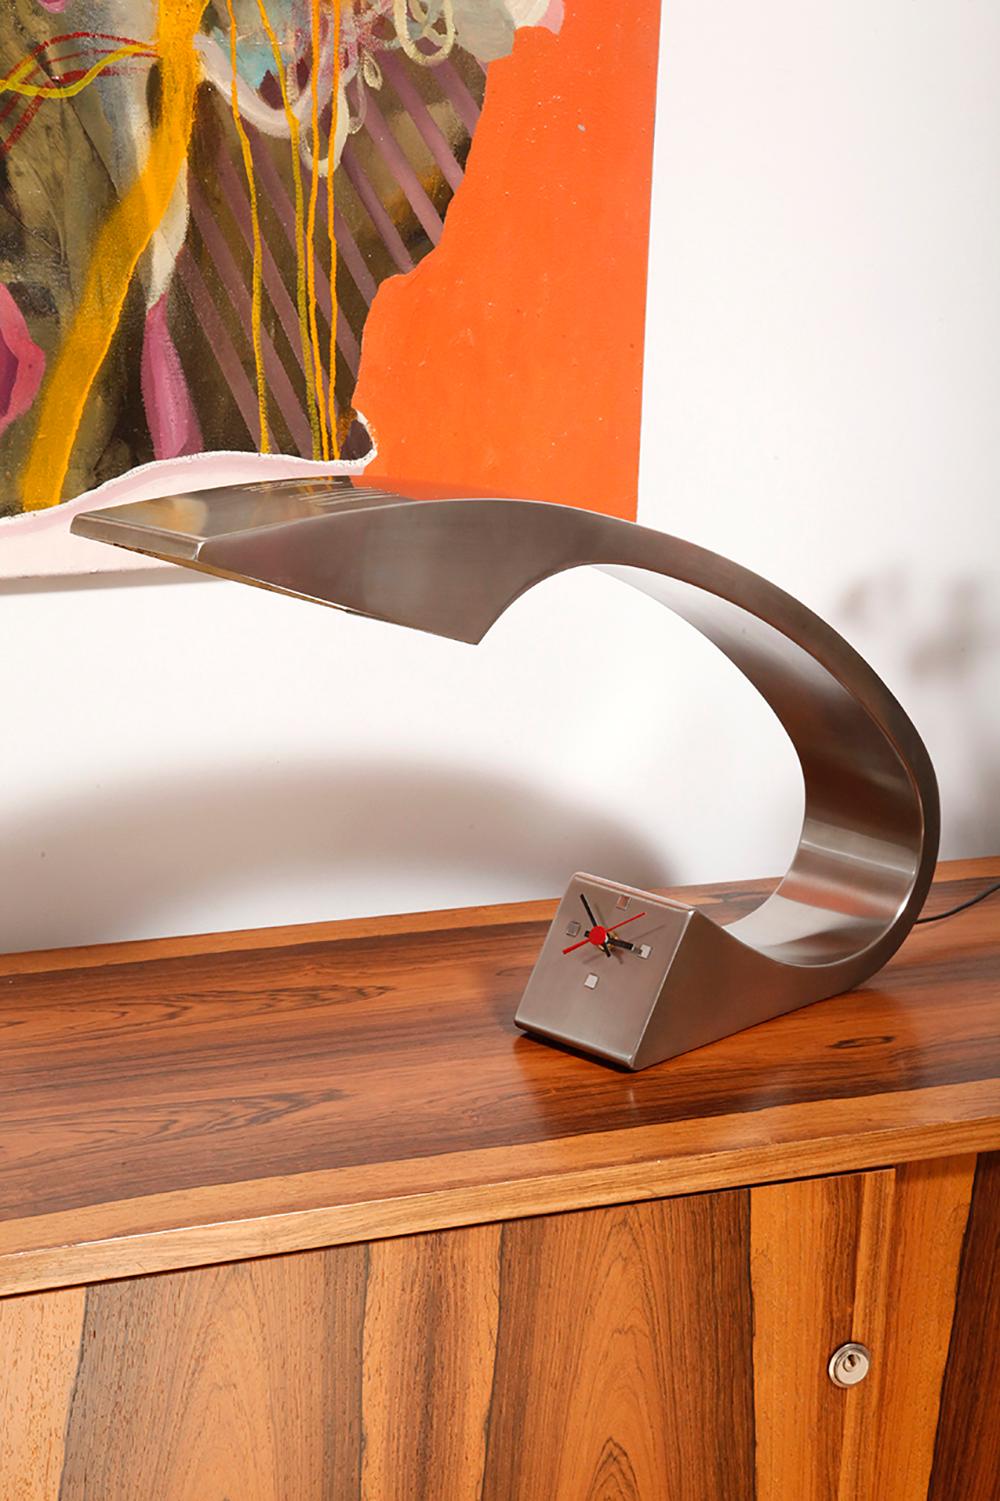 Late 20th Century Large Steel Cabinet Lamp with a Small Clock 'Impala' by Fase, Spain 1970s For Sale